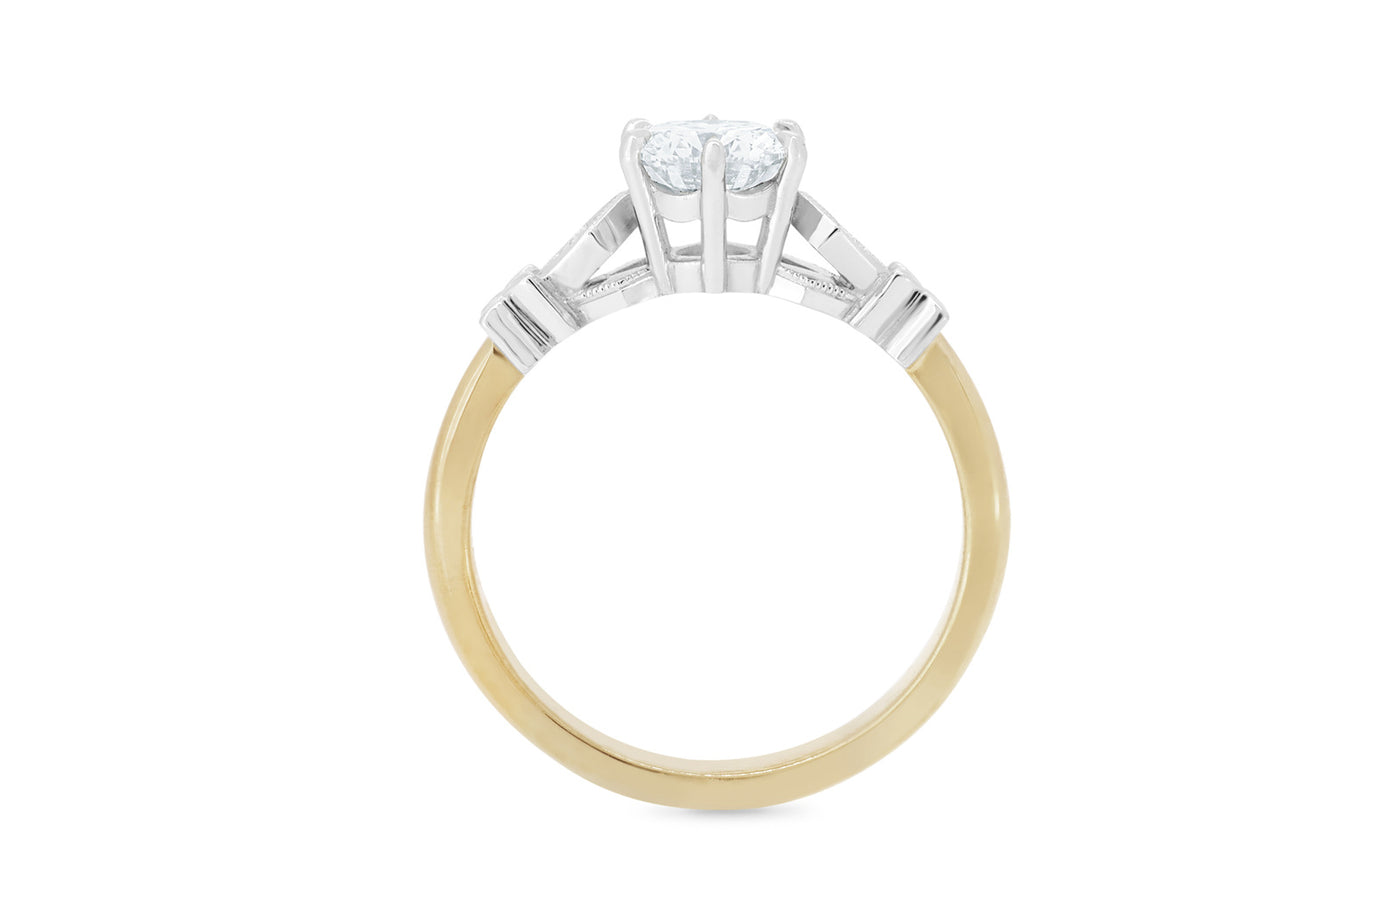 celtic inspired, diamond solitaire engagement ring, 18k, 18ct yellow gold, platinum setting, jewellery, jewelry, narrative collection, ring design, specialist, millgrain edge, deco style shoulders  